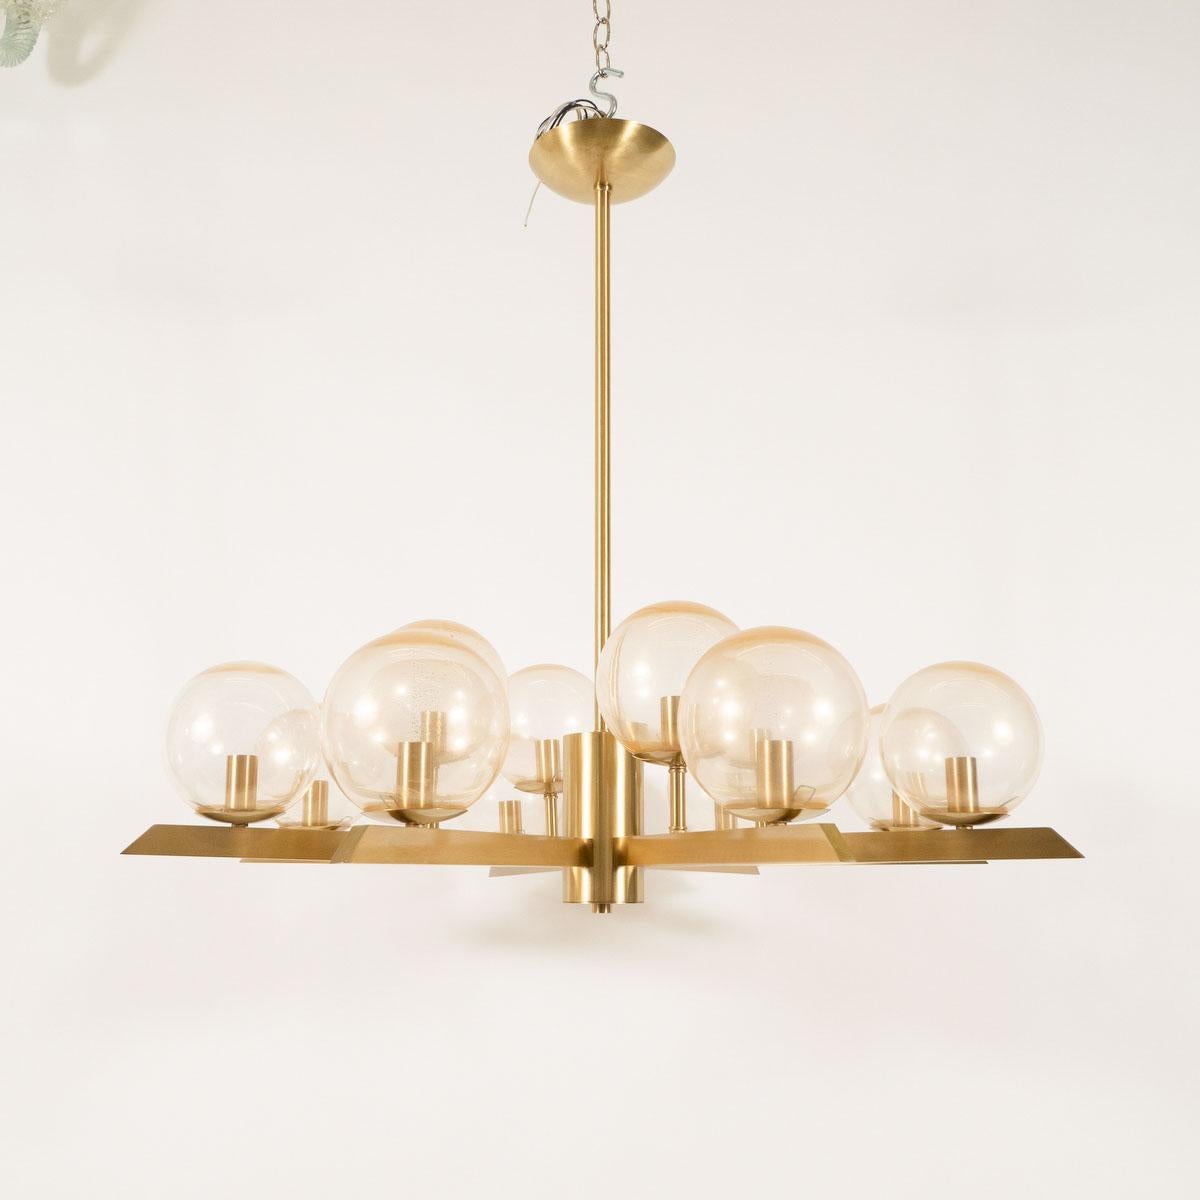 American Brass Sunburst Style Chandelier with Glass Globes For Sale